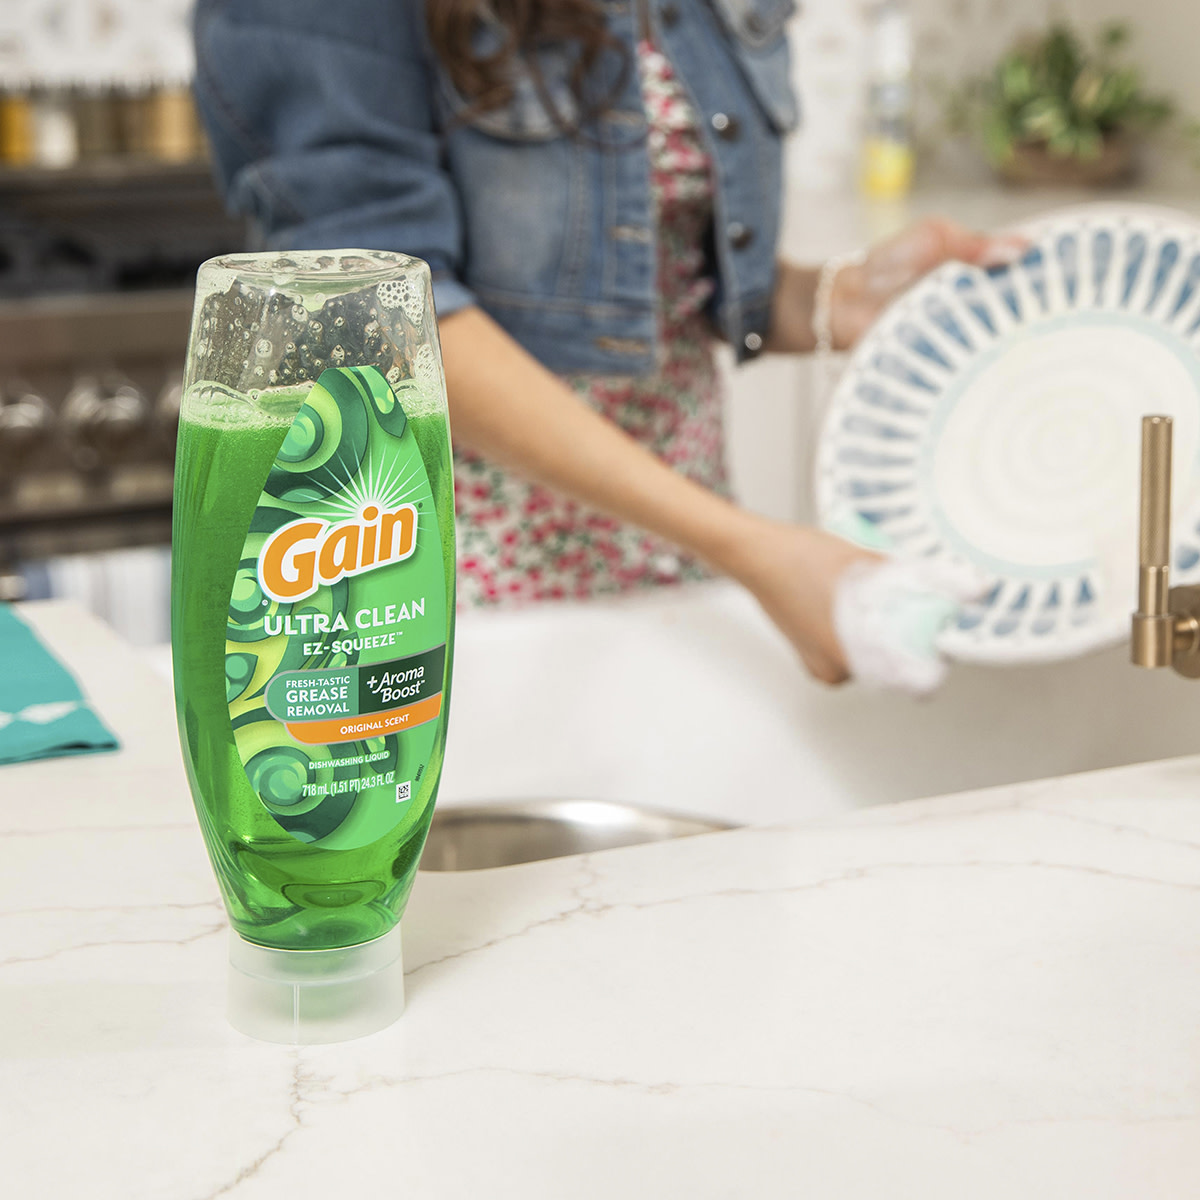 Gain Ultra Clean Ex-Squeeze in the kitchen while person is washing the dishes in background